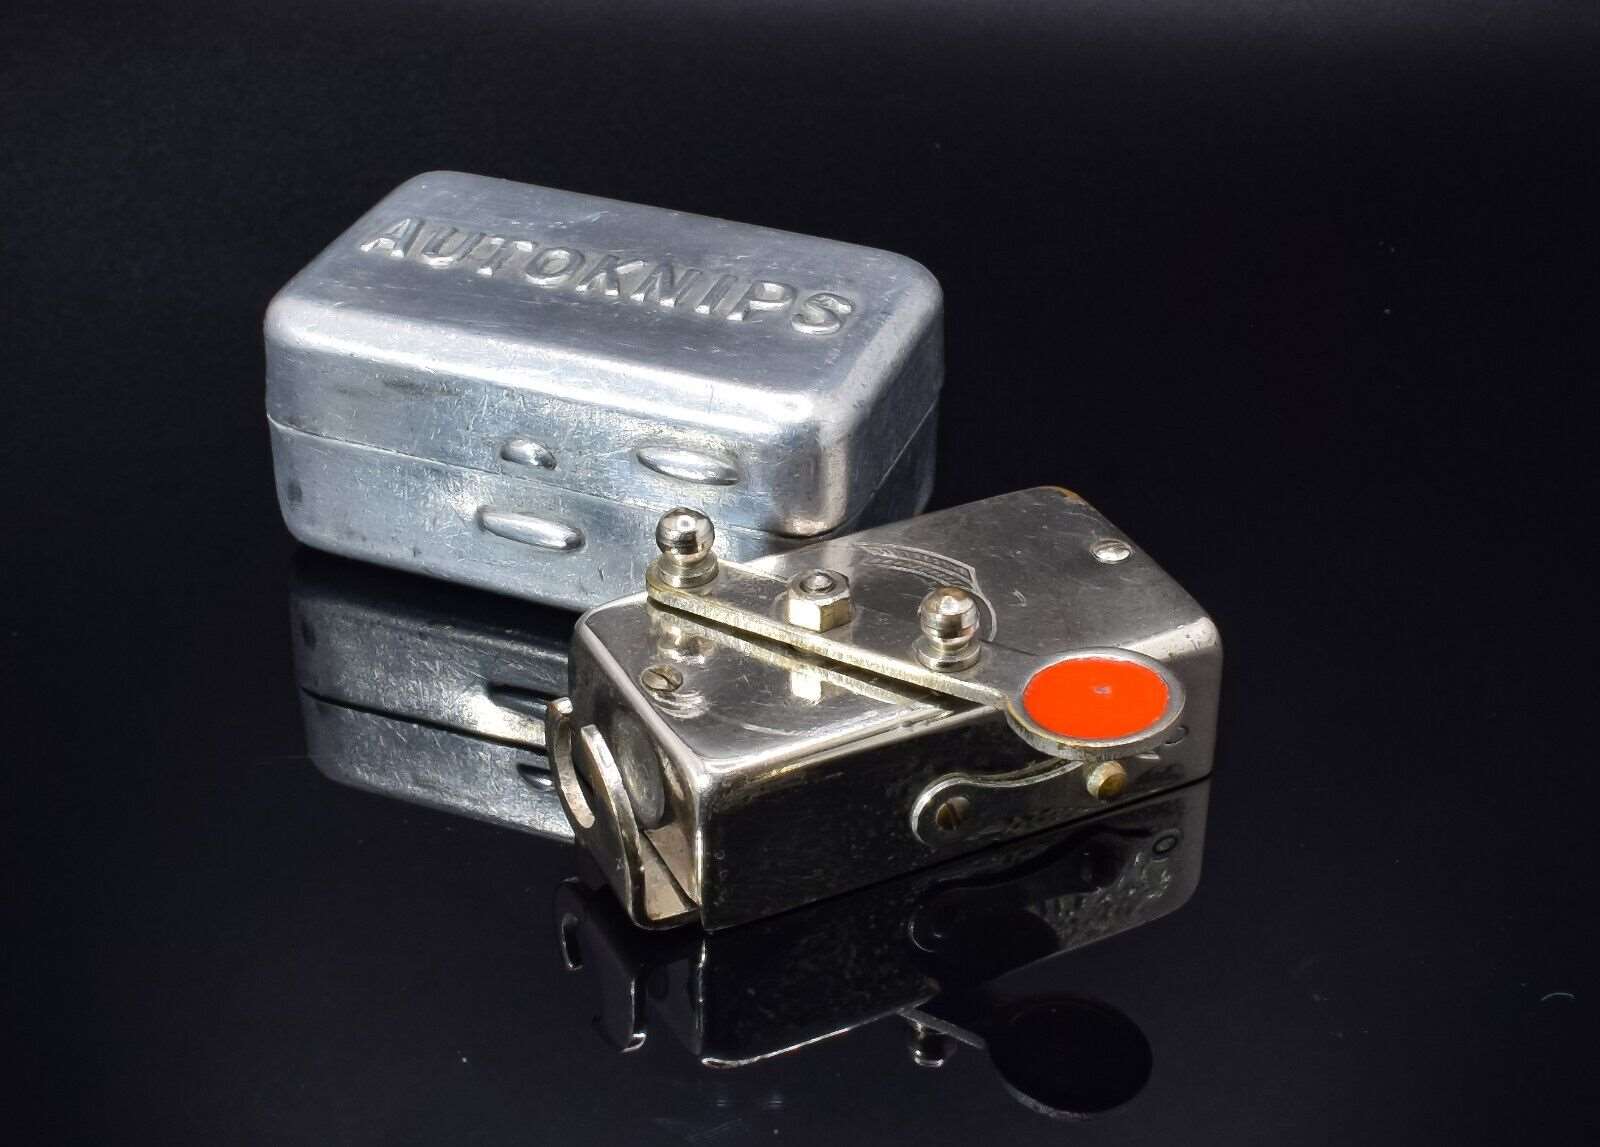 Vintage Haka Autoknips 1 Self Timer for Shutter Release Made in Germany 1920's